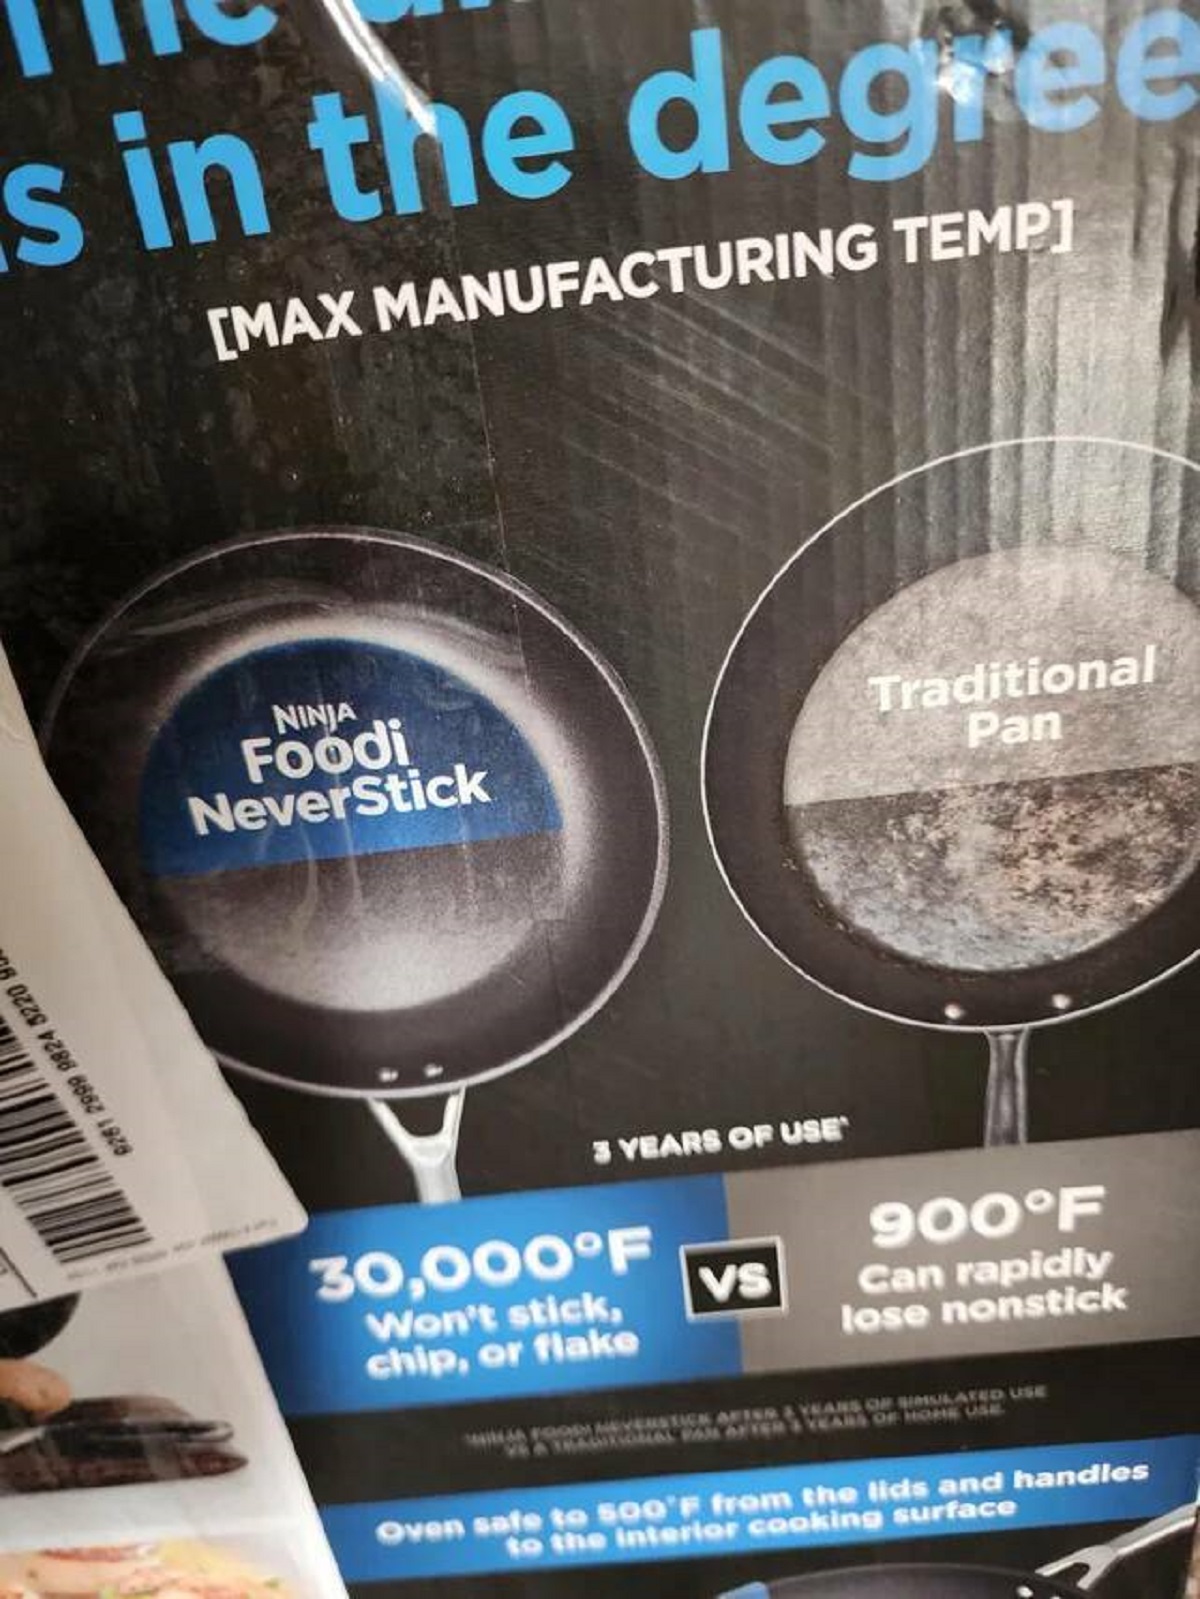 poster - s in the degree Max Manufacturing Temp 2 Ninja Foodi NeverStick Years Of Use 30,000F Won't stick, chip, or flake Vs Traditional Pan 900F Can rapidly lose nonstick Oven safe to 500'F from the lide and handles to the interior cooking surface